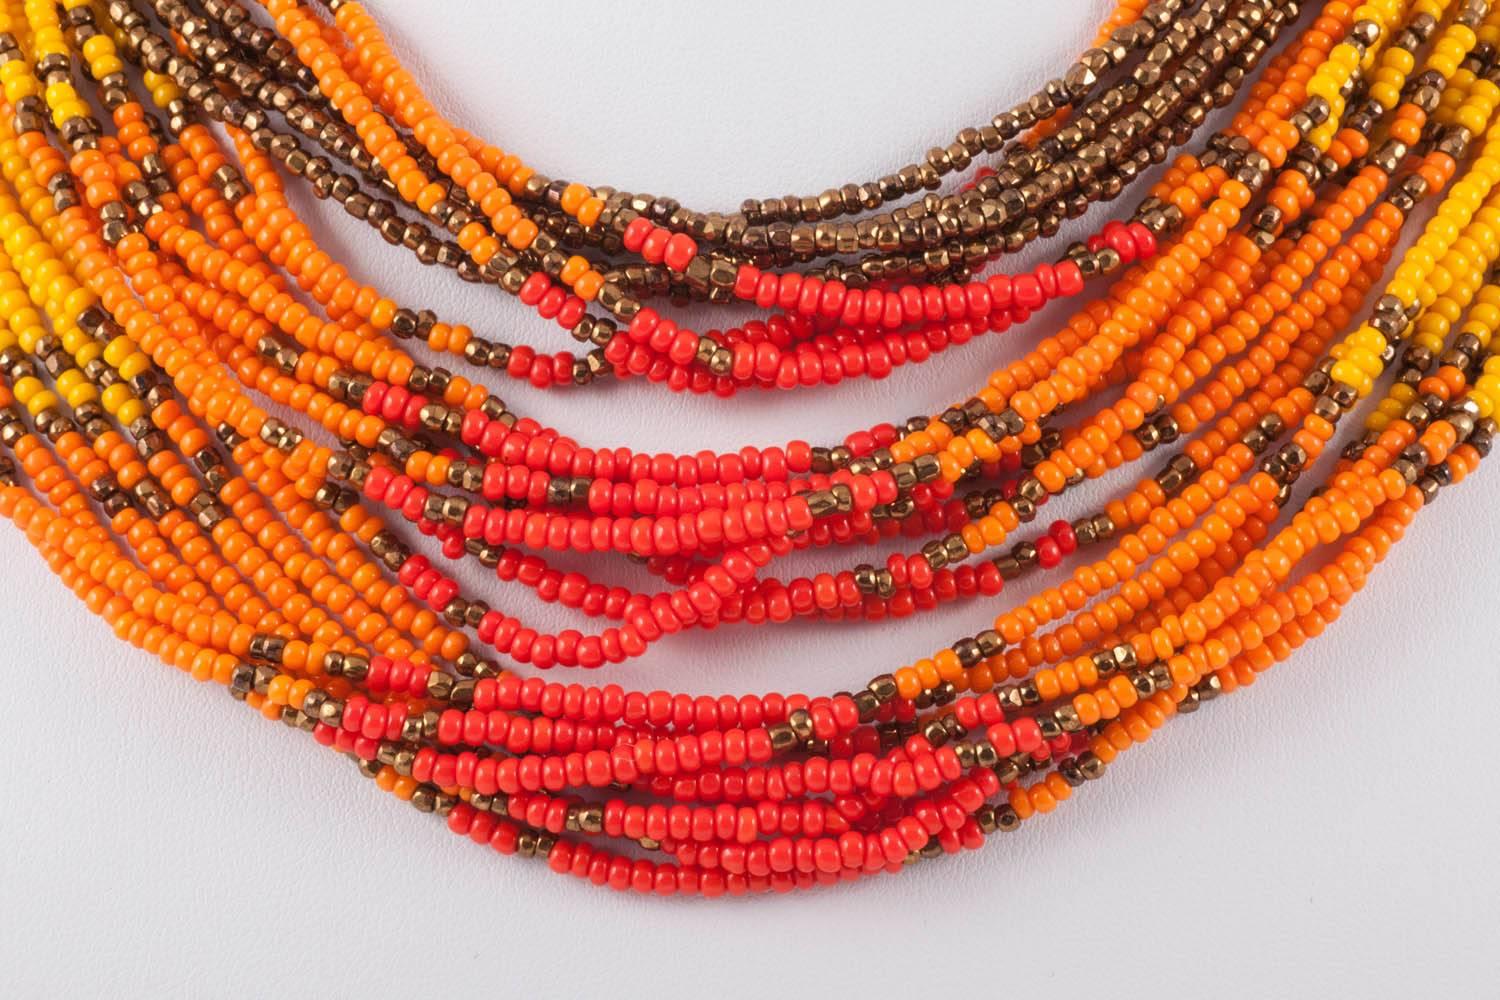 A highly vibrant and wonderfully cheerful multi strand beaded necklace by Miriam Haskell, bursting with yellow, ochre, orange, red  coloured small beads, shot through with bronze coloured beads, with a nod to American Indian design. It has a fixed